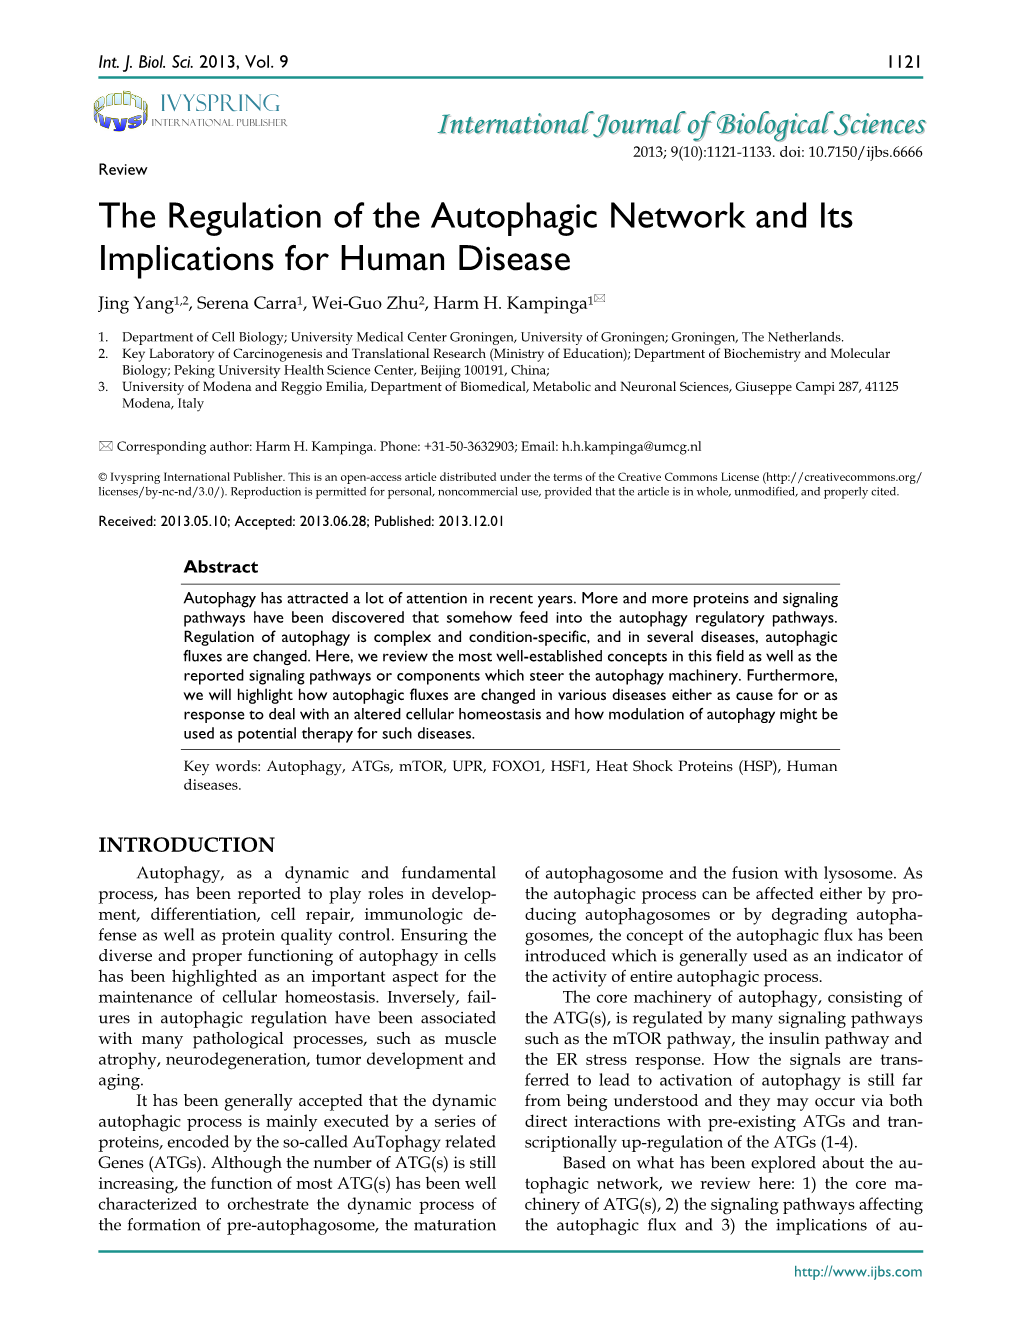 The Regulation of the Autophagic Network and Its Implications for Human Disease Jing Yang1,2, Serena Carra1, Wei-Guo Zhu2, Harm H